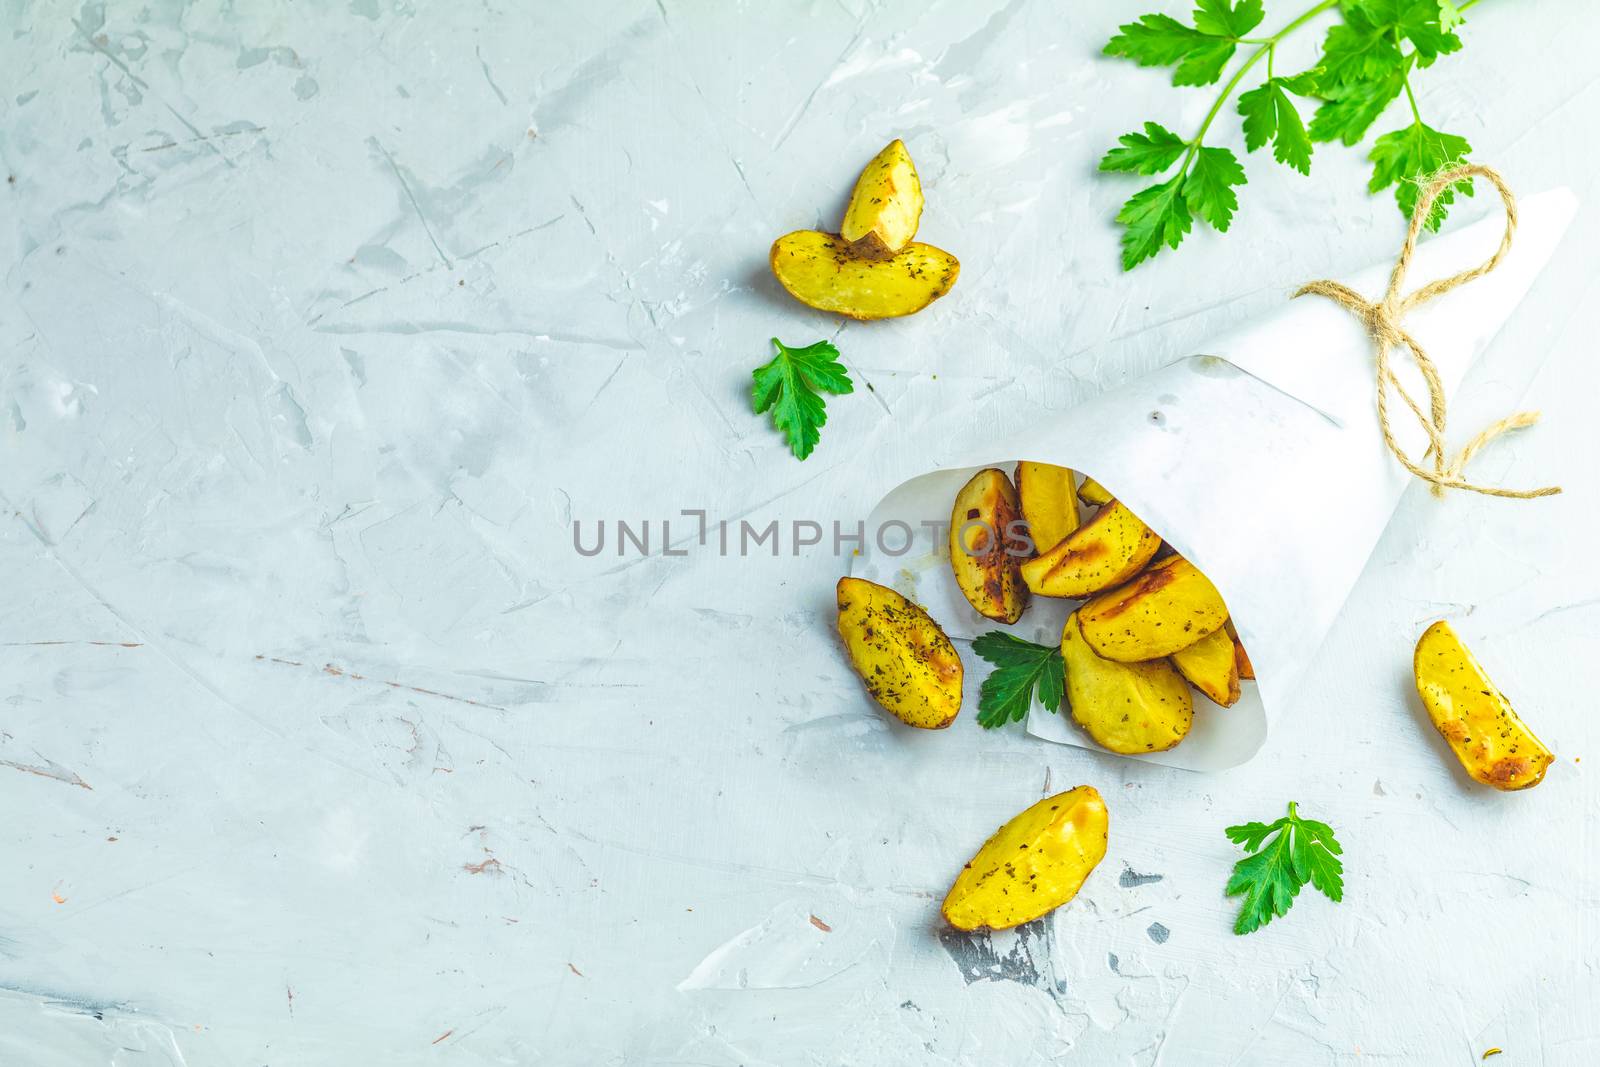 Baked potato wedges on paper with addition sea salt and parsley on a light gray concrete background